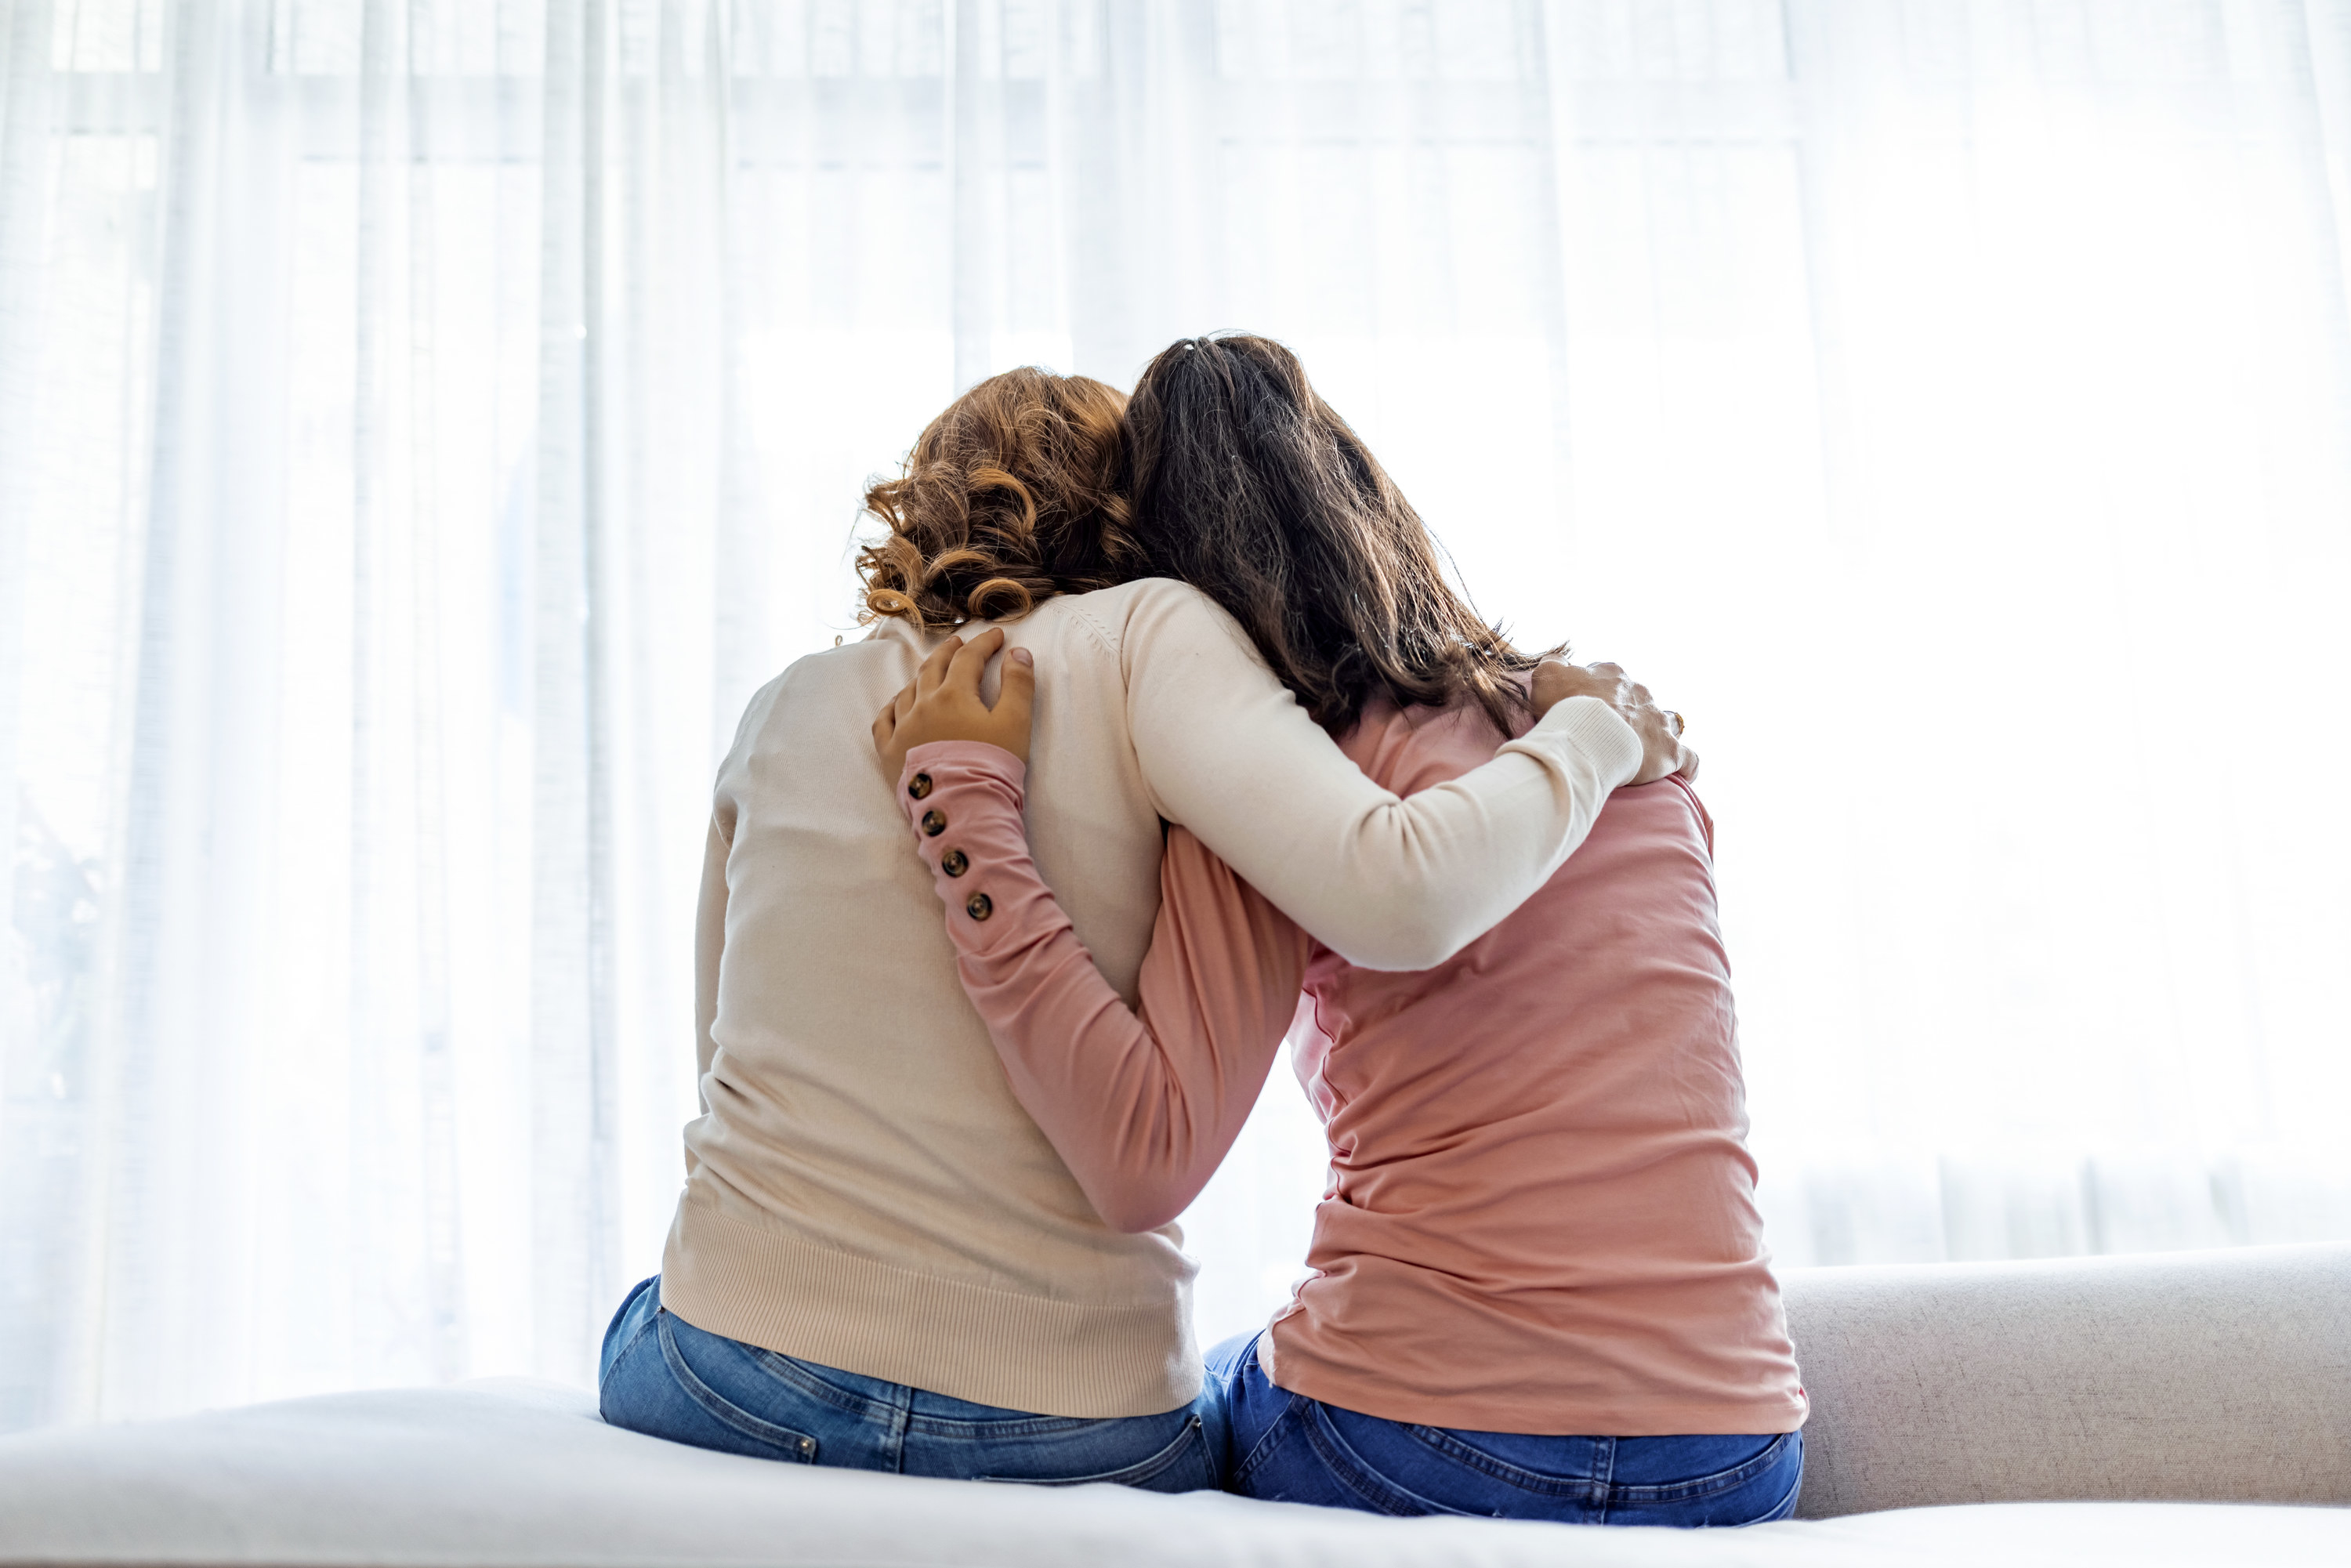 A mom and her daughter are shown from behind as they hug each other